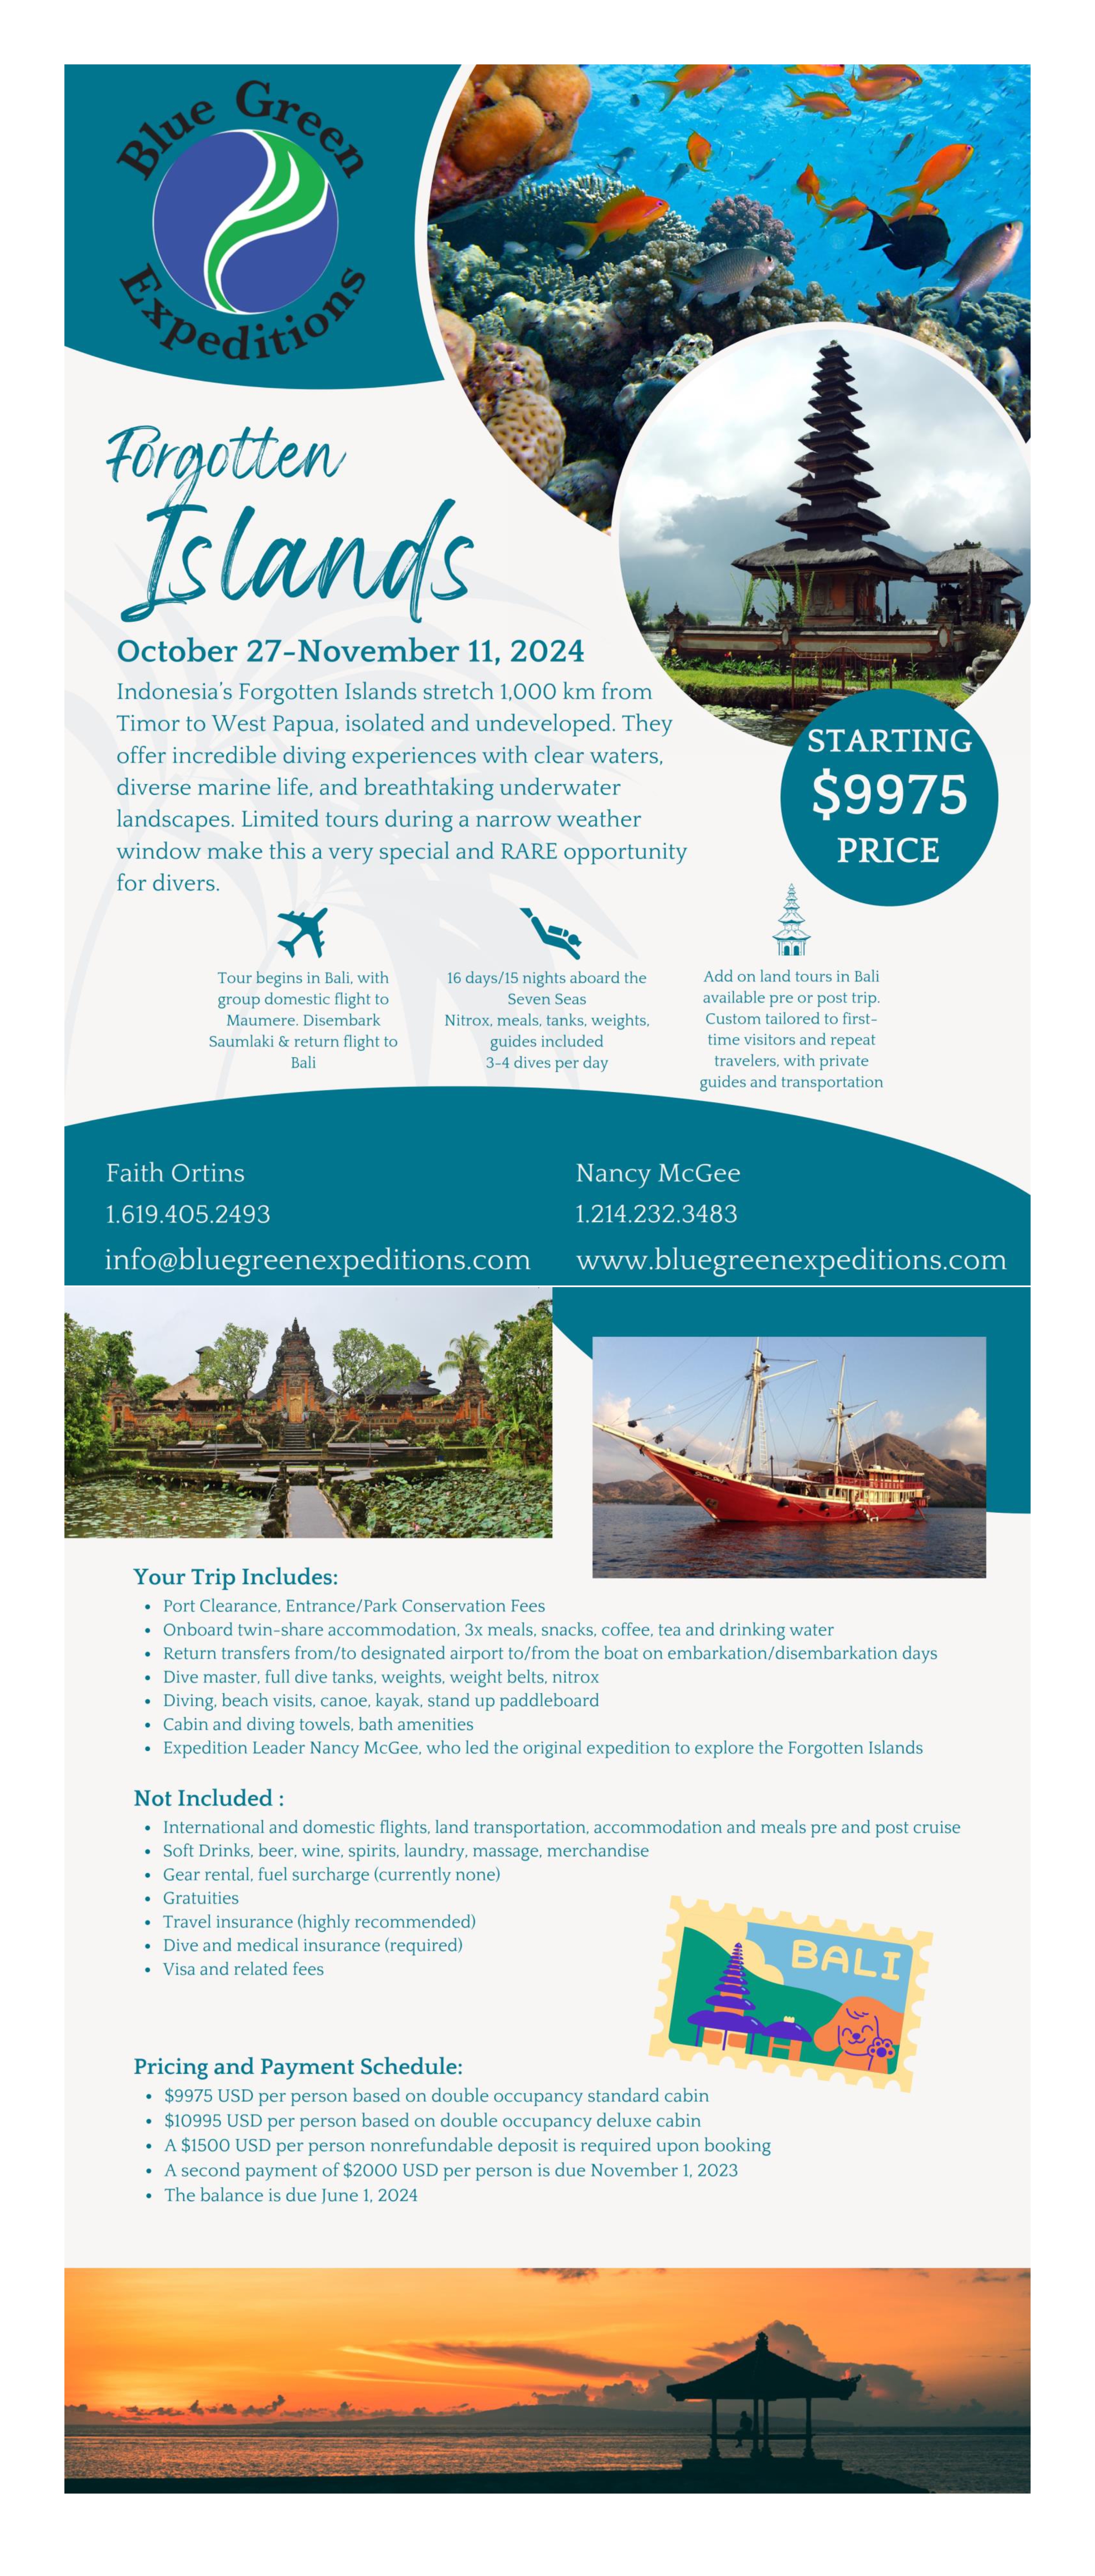 Forgotten Islands, Indonesia October 27 - November 11, 2024. Trip description and pricing. PDF flyer contains the same